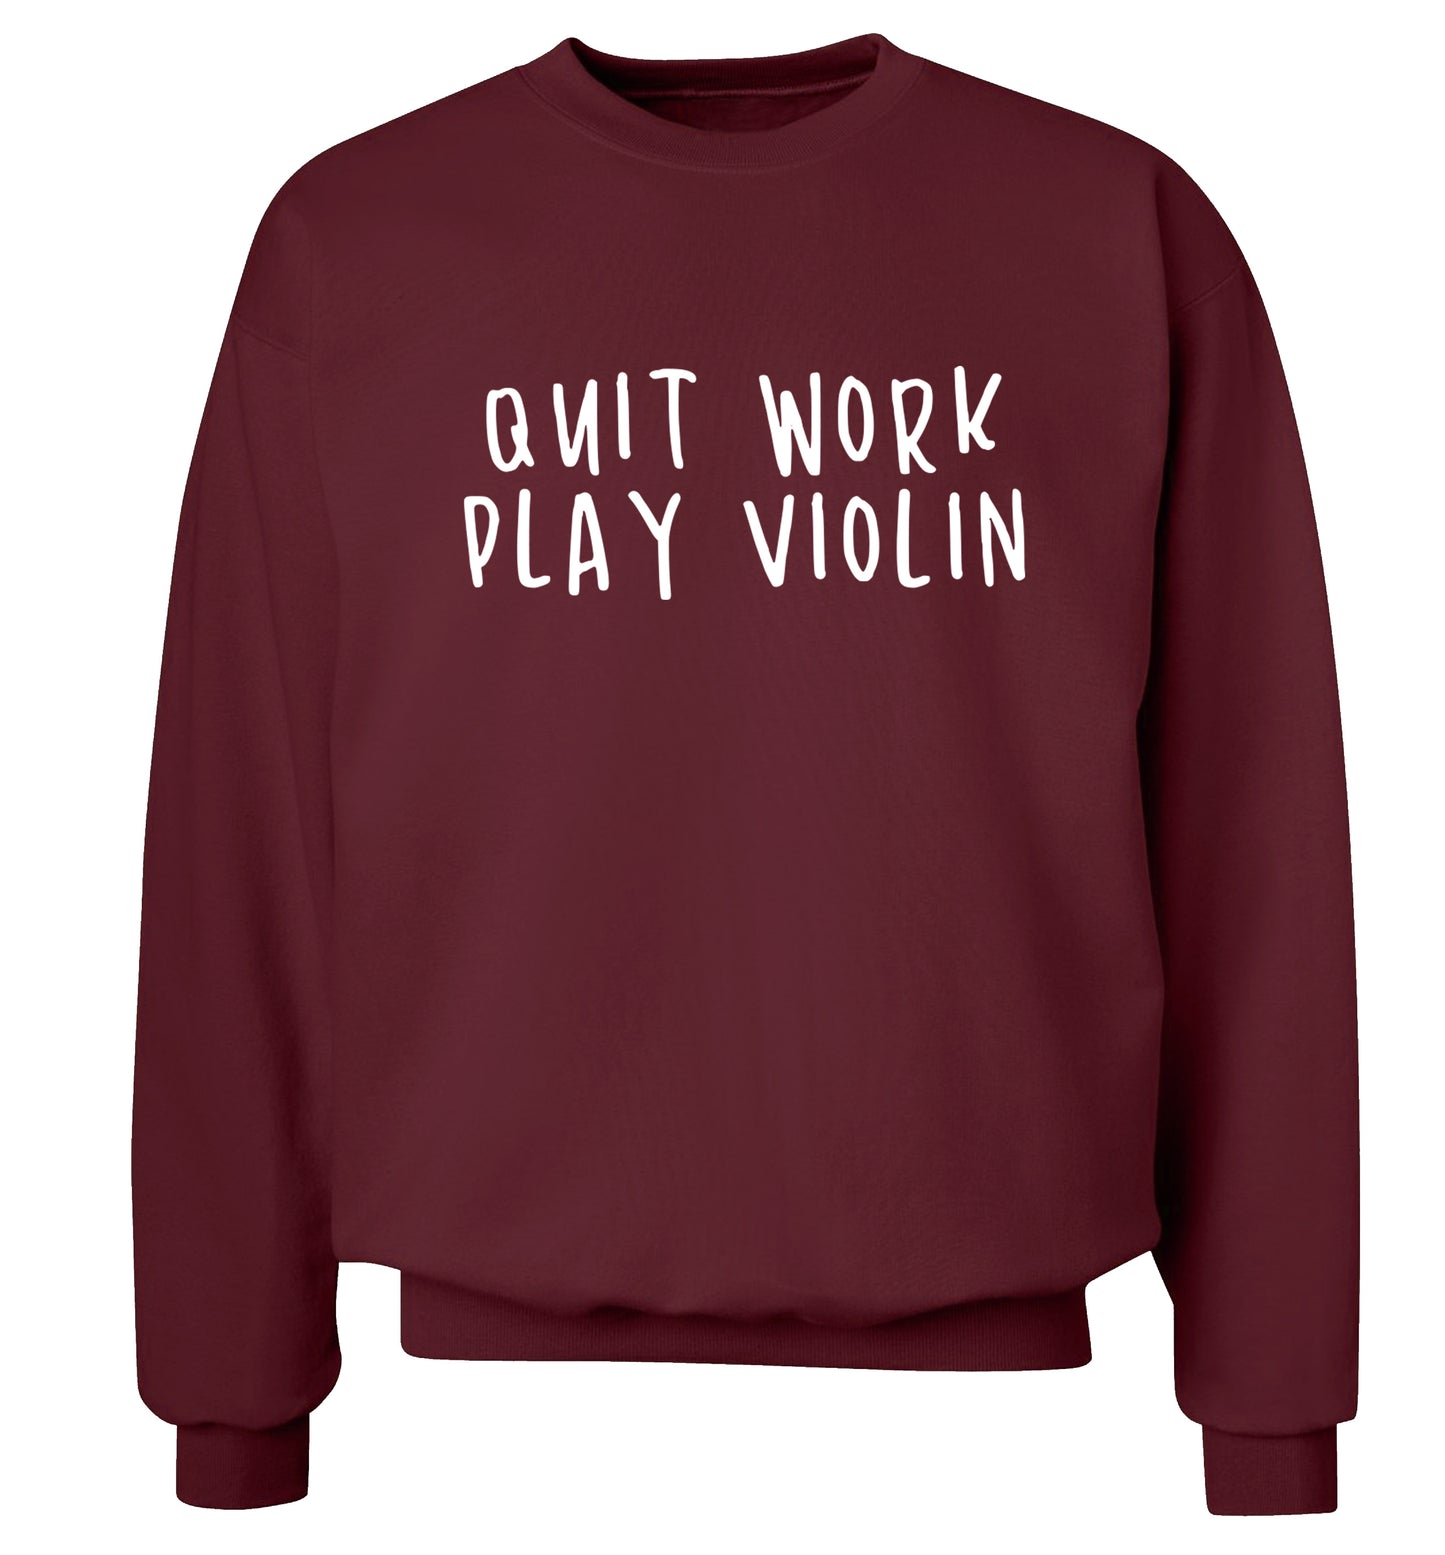 Quit work play violin Adult's unisex maroon Sweater 2XL